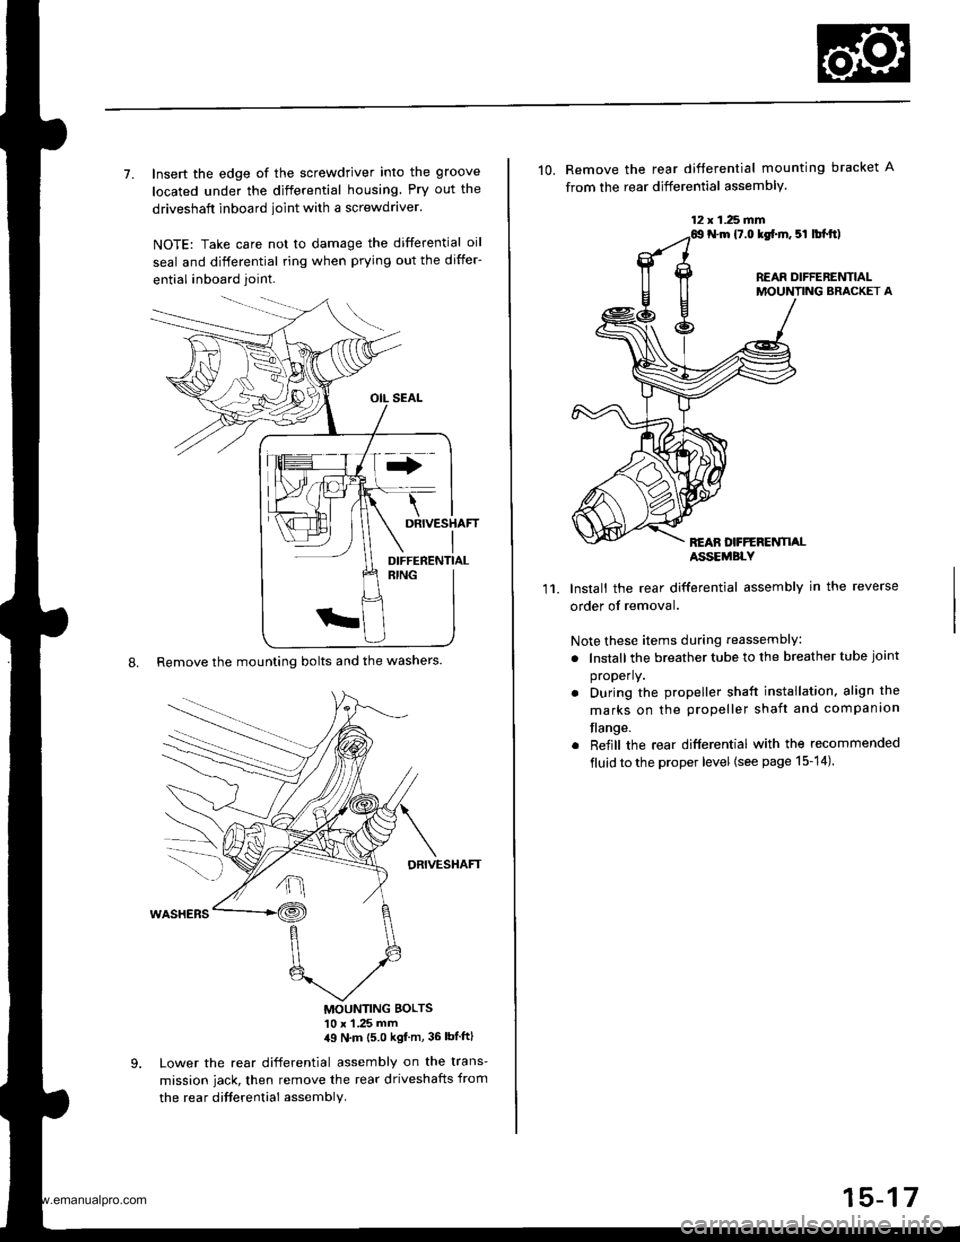 HONDA CR-V 1997 RD1-RD3 / 1.G Workshop Manual 
7. Insert the edge of the screwdriver into the groove
located under the differential housing Pry out the
driveshaft inboard ioint with a screwdraver.
NOTE: Take care not to damage the differential oi